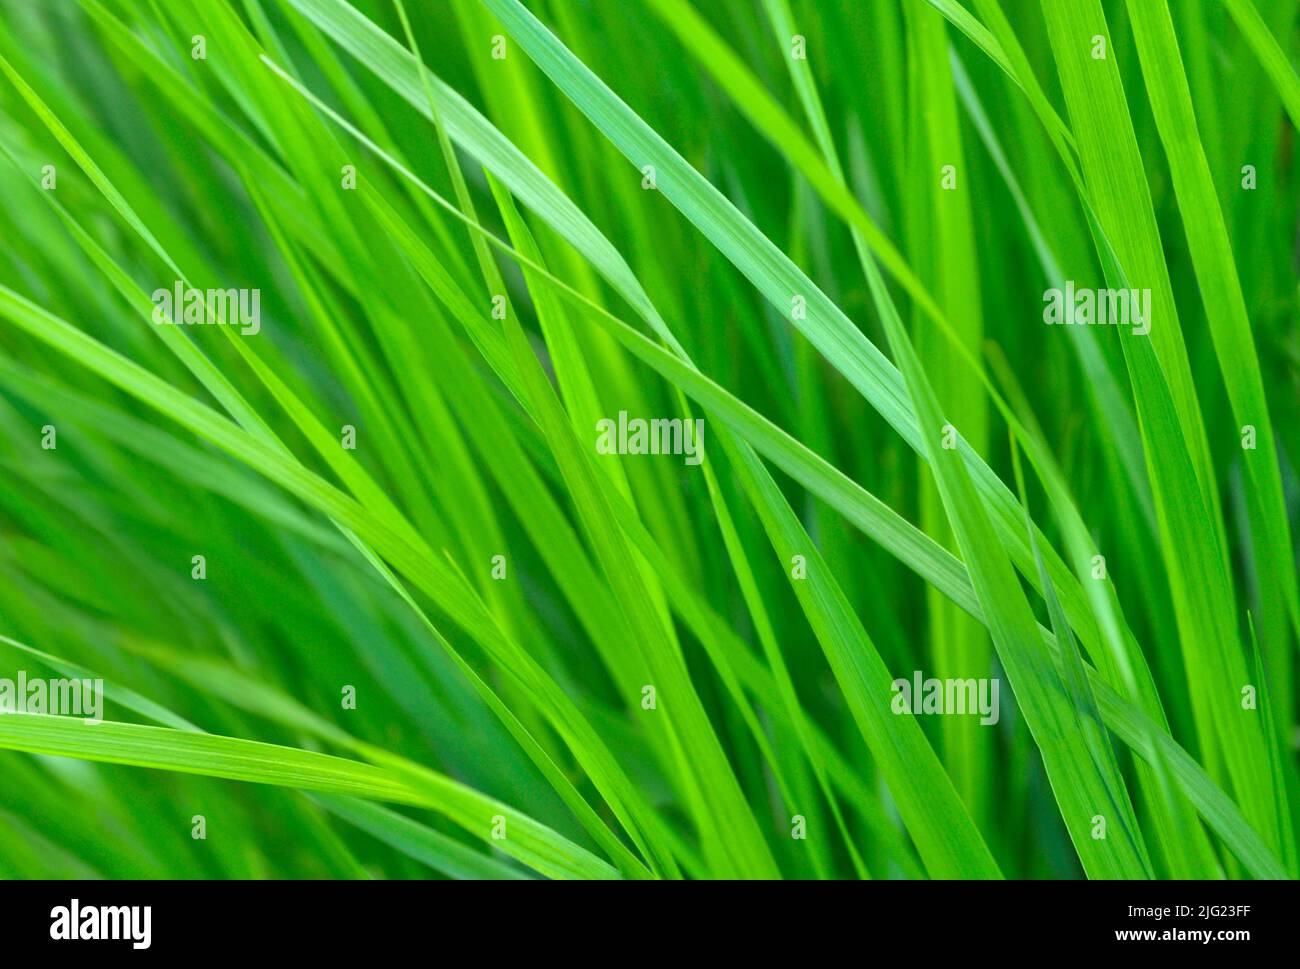 Close-up of blades of grass Stock Photo